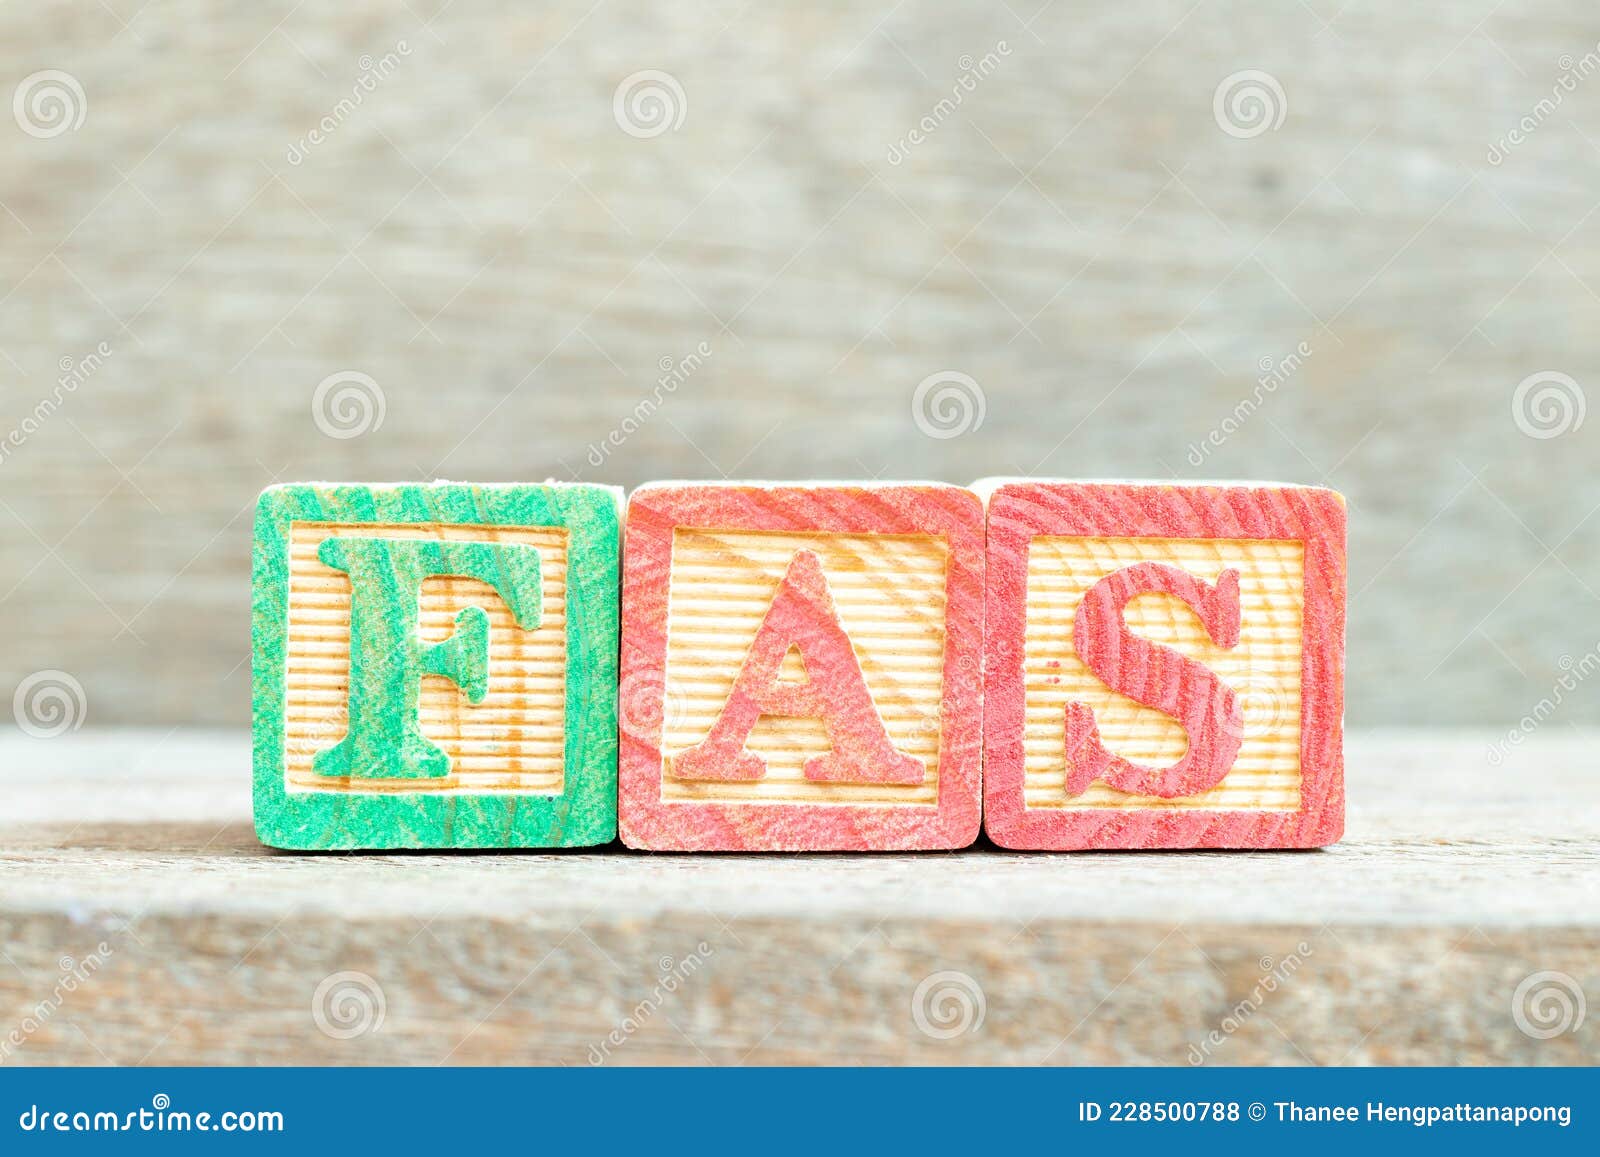 color letter block in word fas abbreviation of fetal alcohol syndrome, free alongside or financial accounting standards